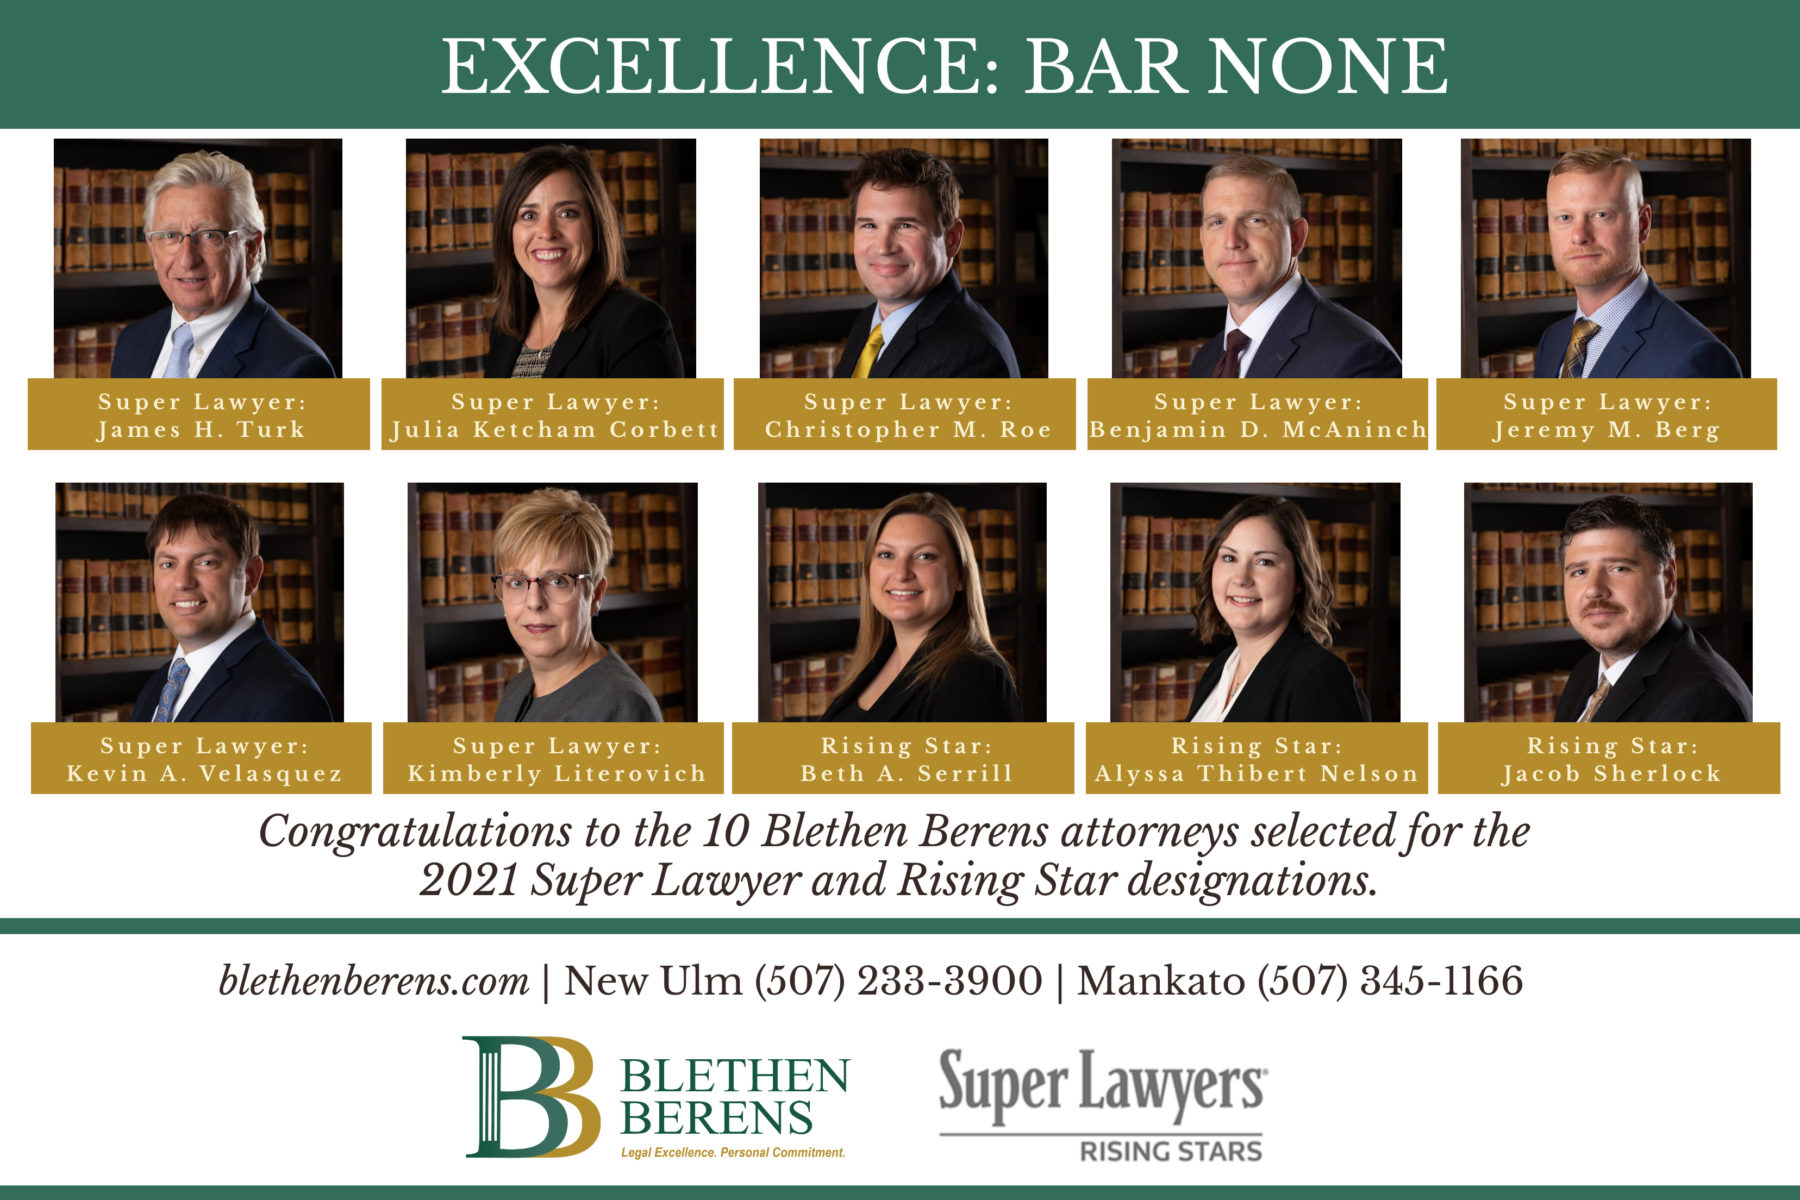 Congratulations to the 10 Blethen Berens attorneys selected for the 2021 Super Lawyer and Rising Star designations. Portraits of award winners.